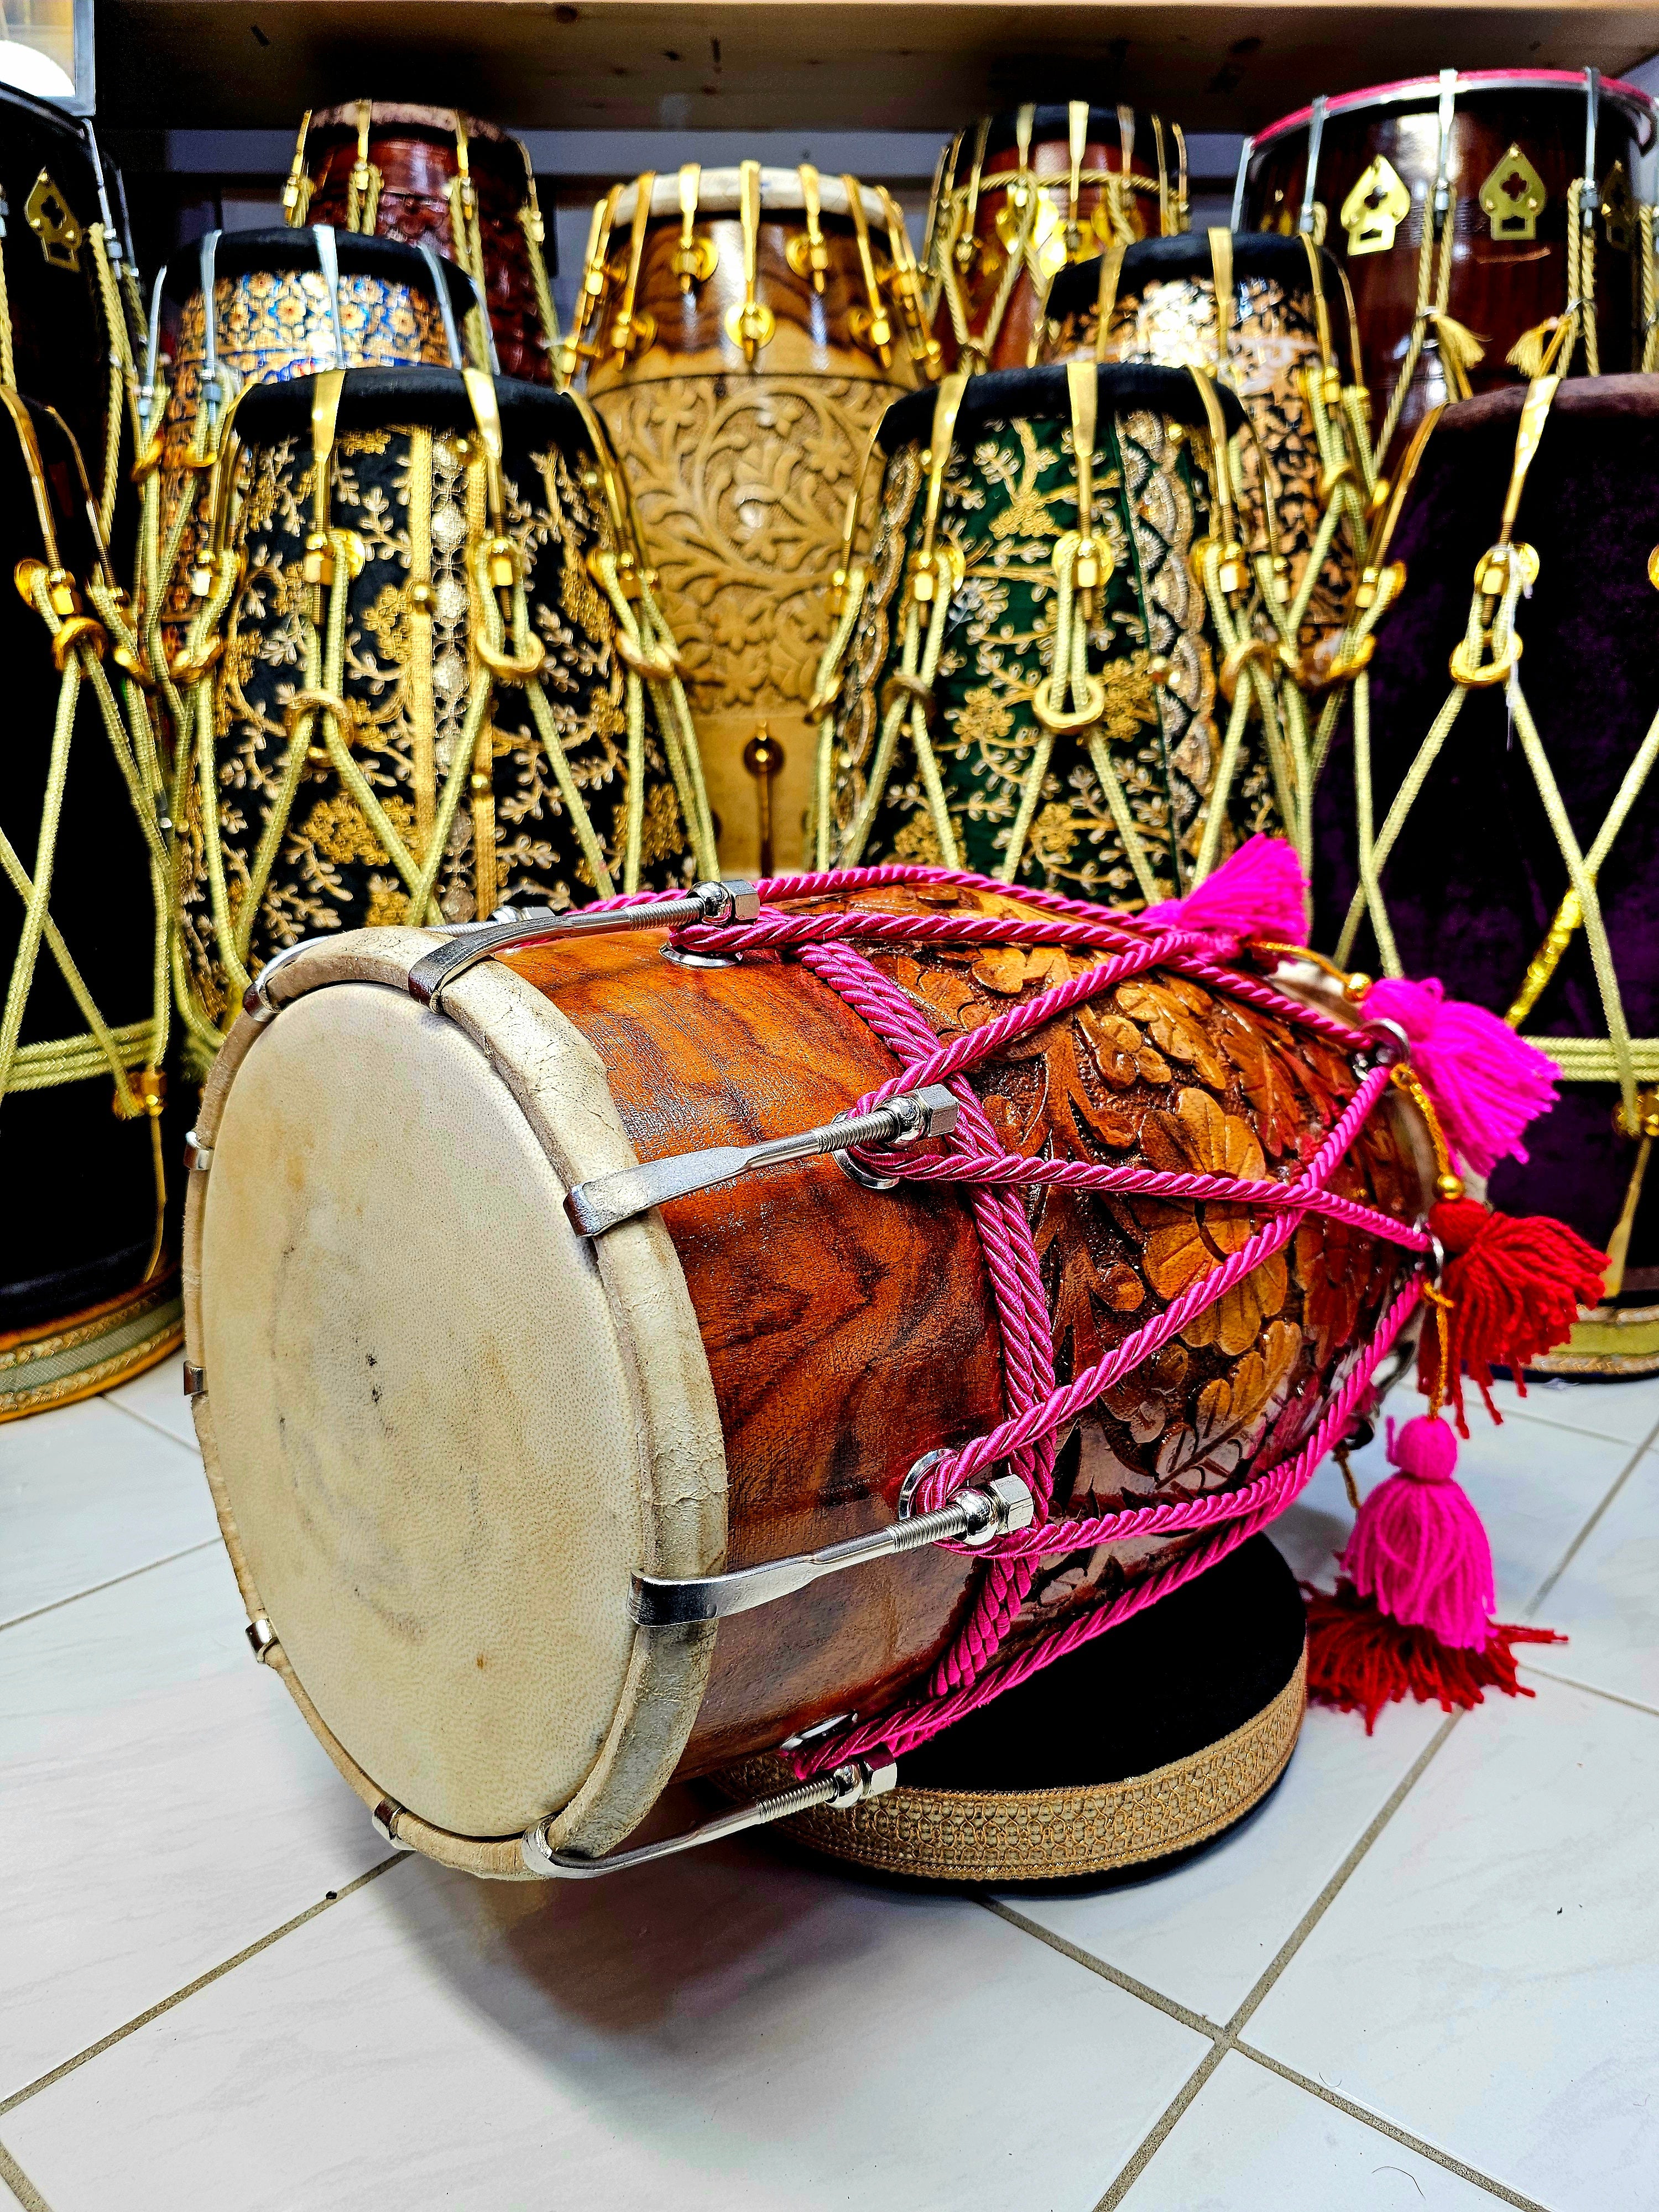 Blossoming Beats: Floral Encarved Red Sheesham Dholak with Chrome Bolts, Pink Ropes Design, and Vibrant Tassels